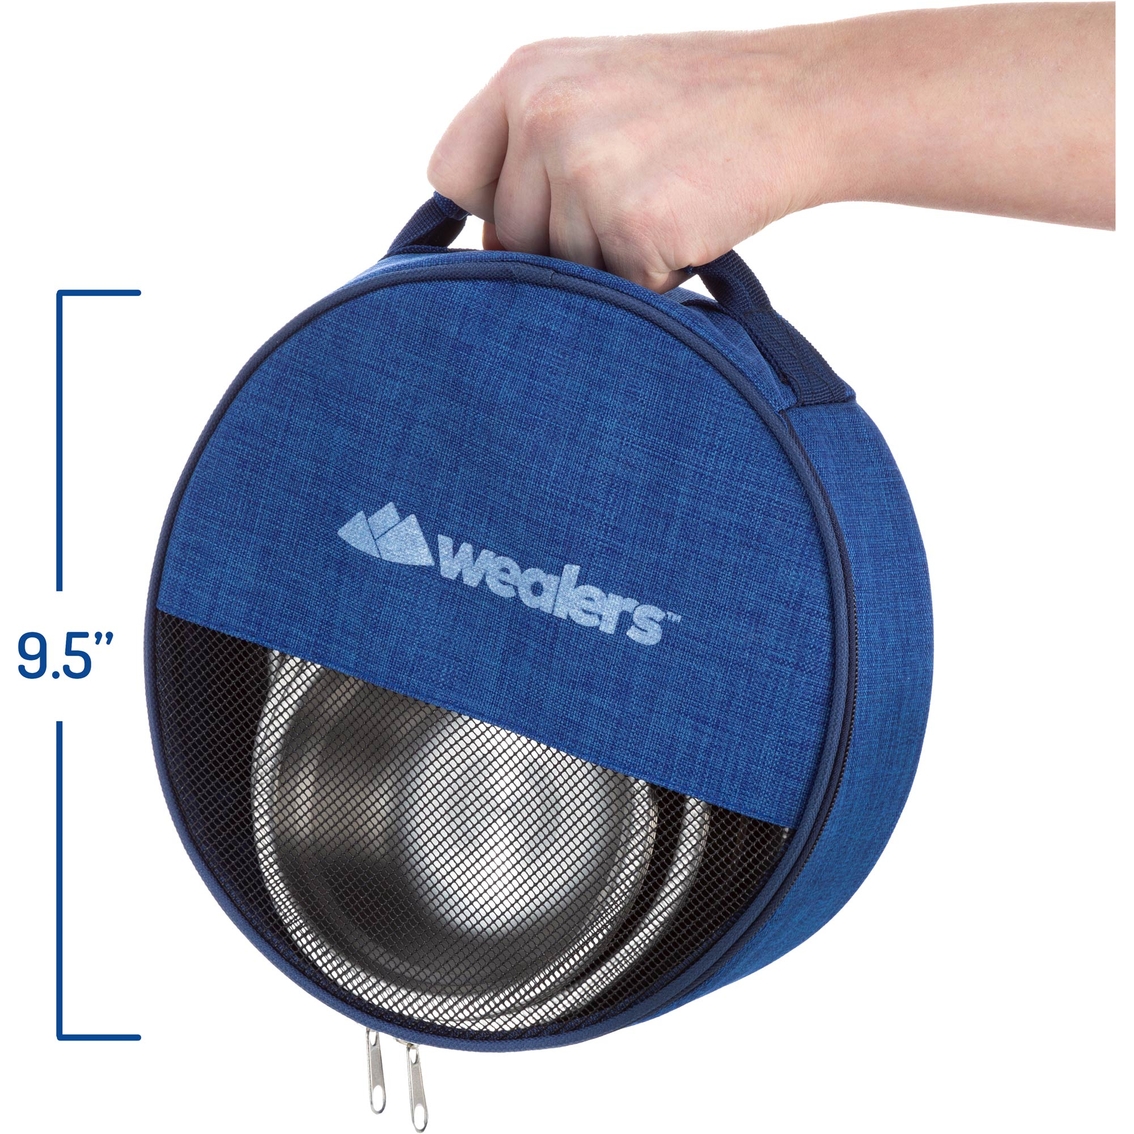 Wealers Stainless Steel Plates and Bowls Camping Set 24 pc. - Image 4 of 6